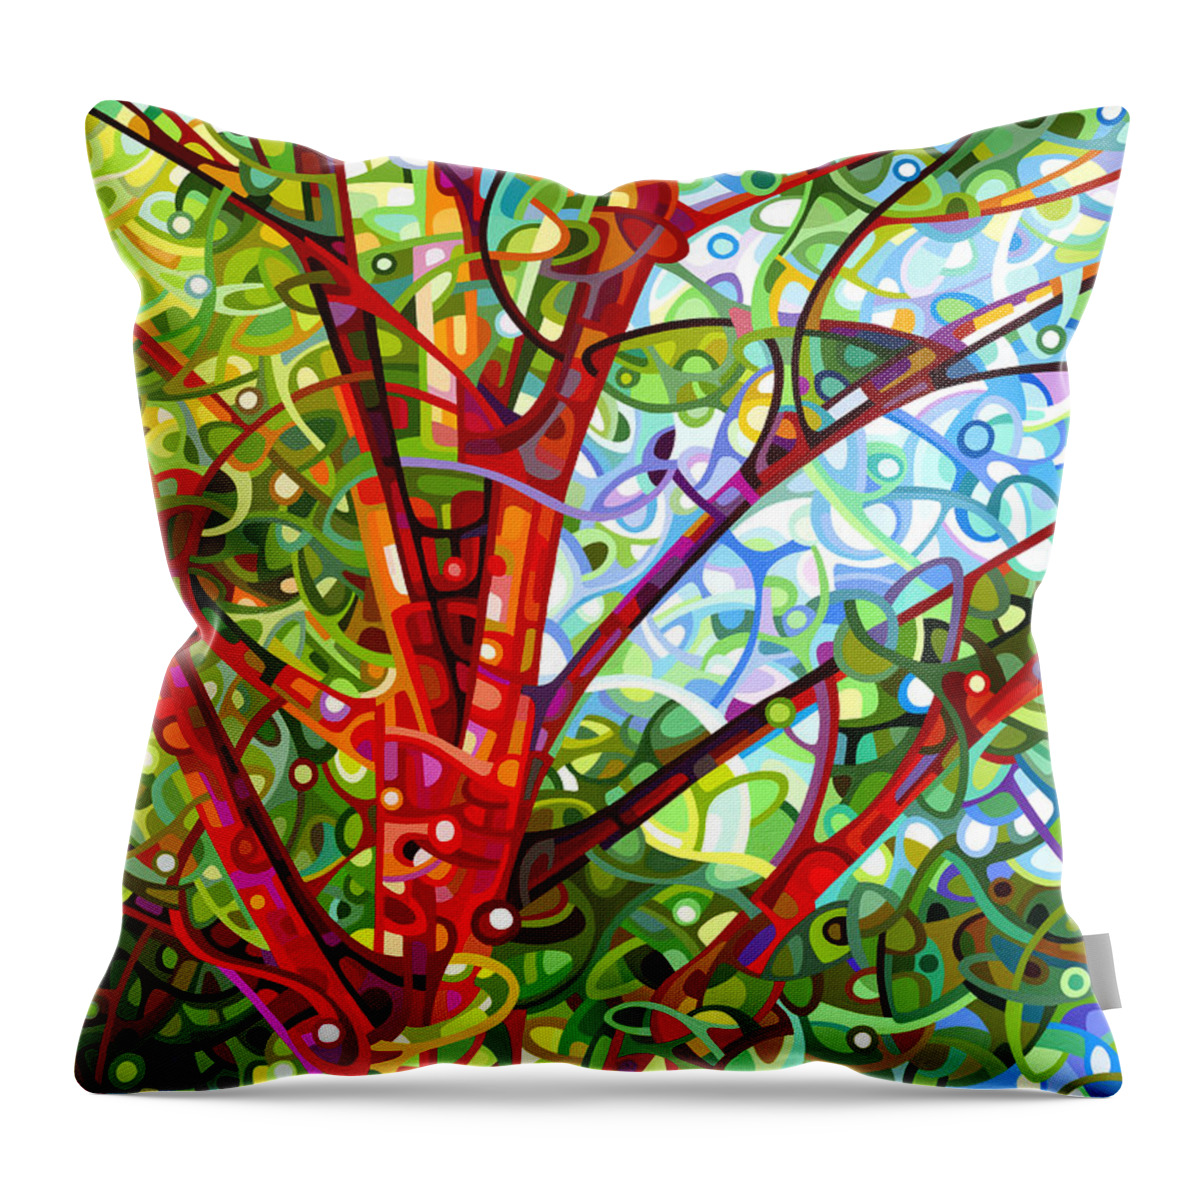 Contemporary Throw Pillow featuring the painting Summer Medley by Mandy Budan